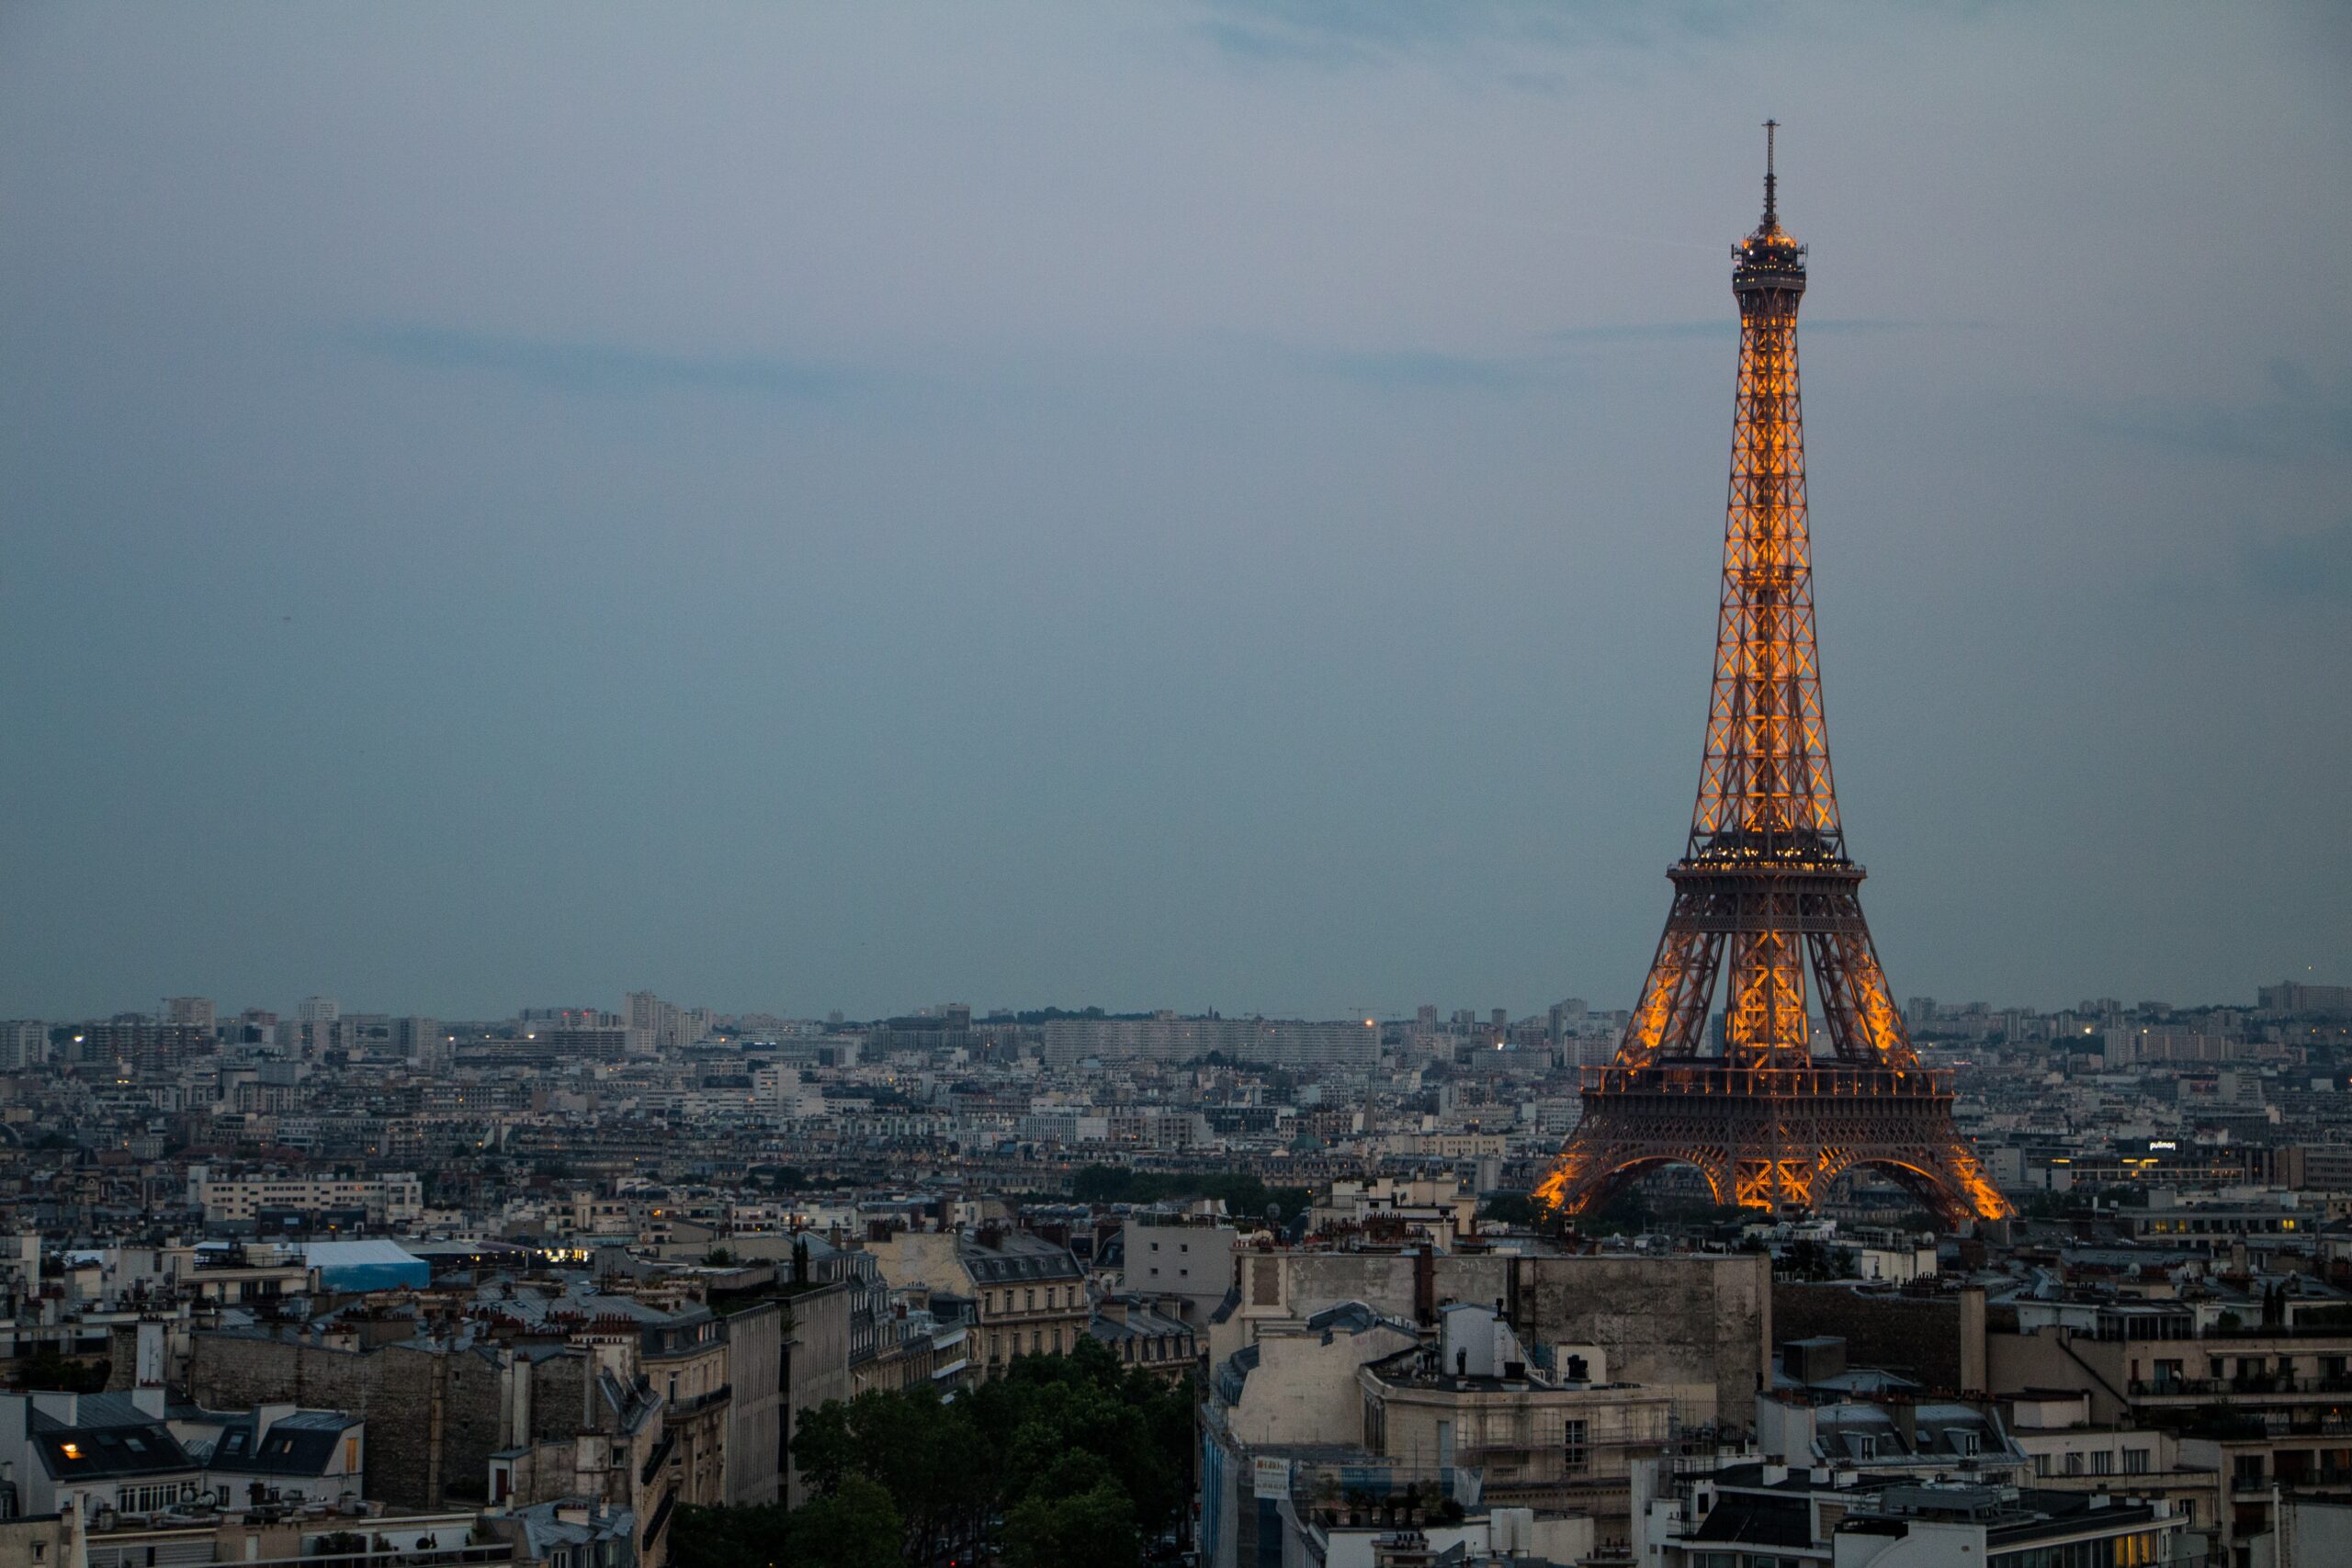 Top Travel Tips for Paris in 2023: Discovering Paris on a Budget